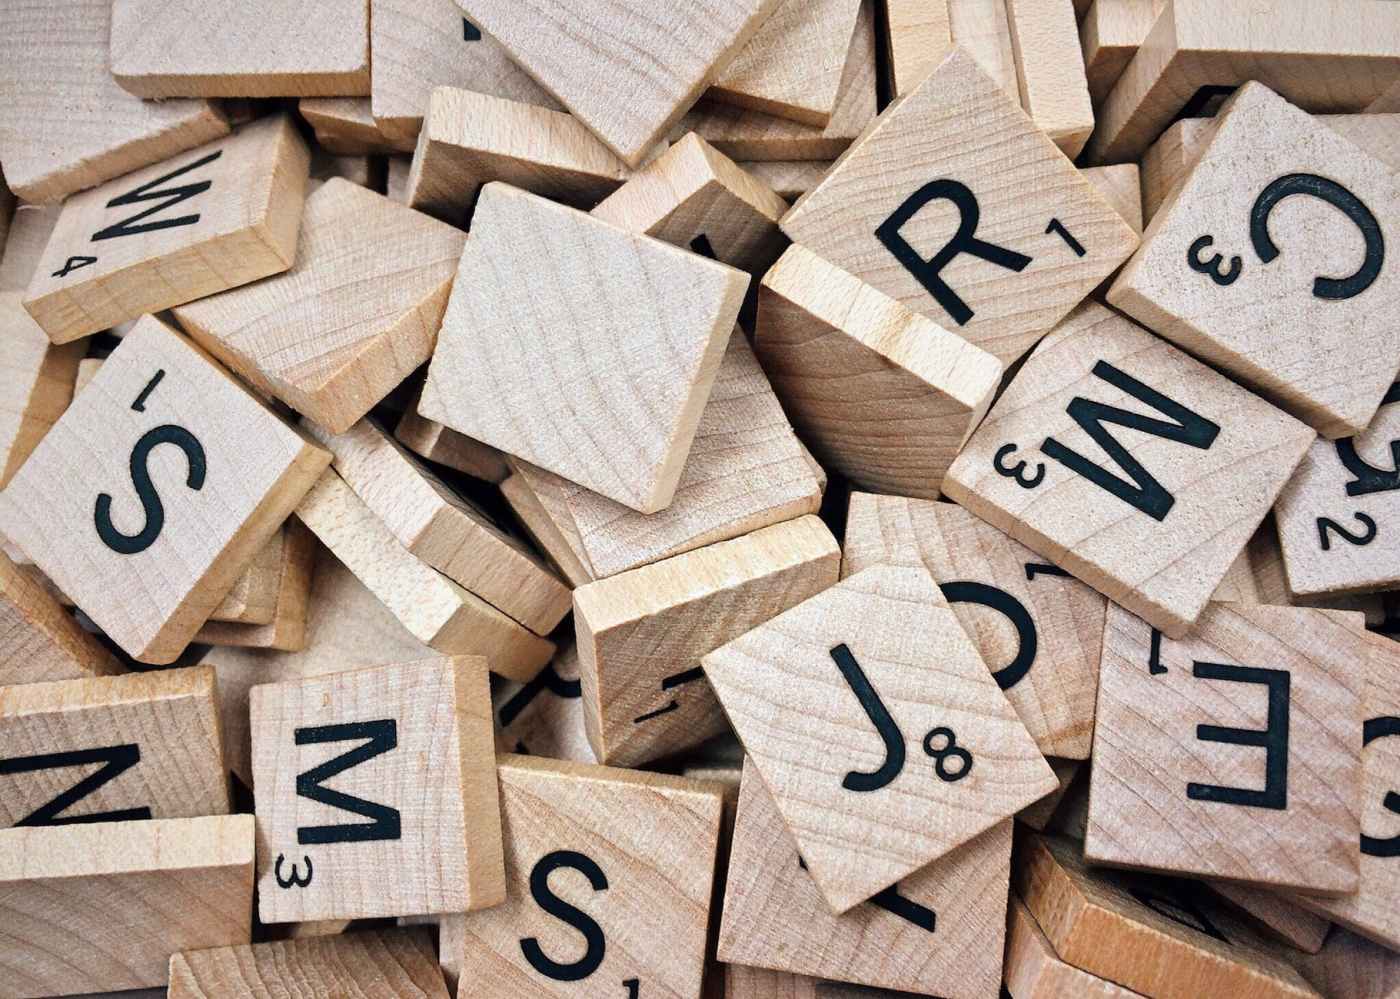 A jumbled pile of Scrabble letter tiles. Some have letters written on them, but many of the tiles are blank.